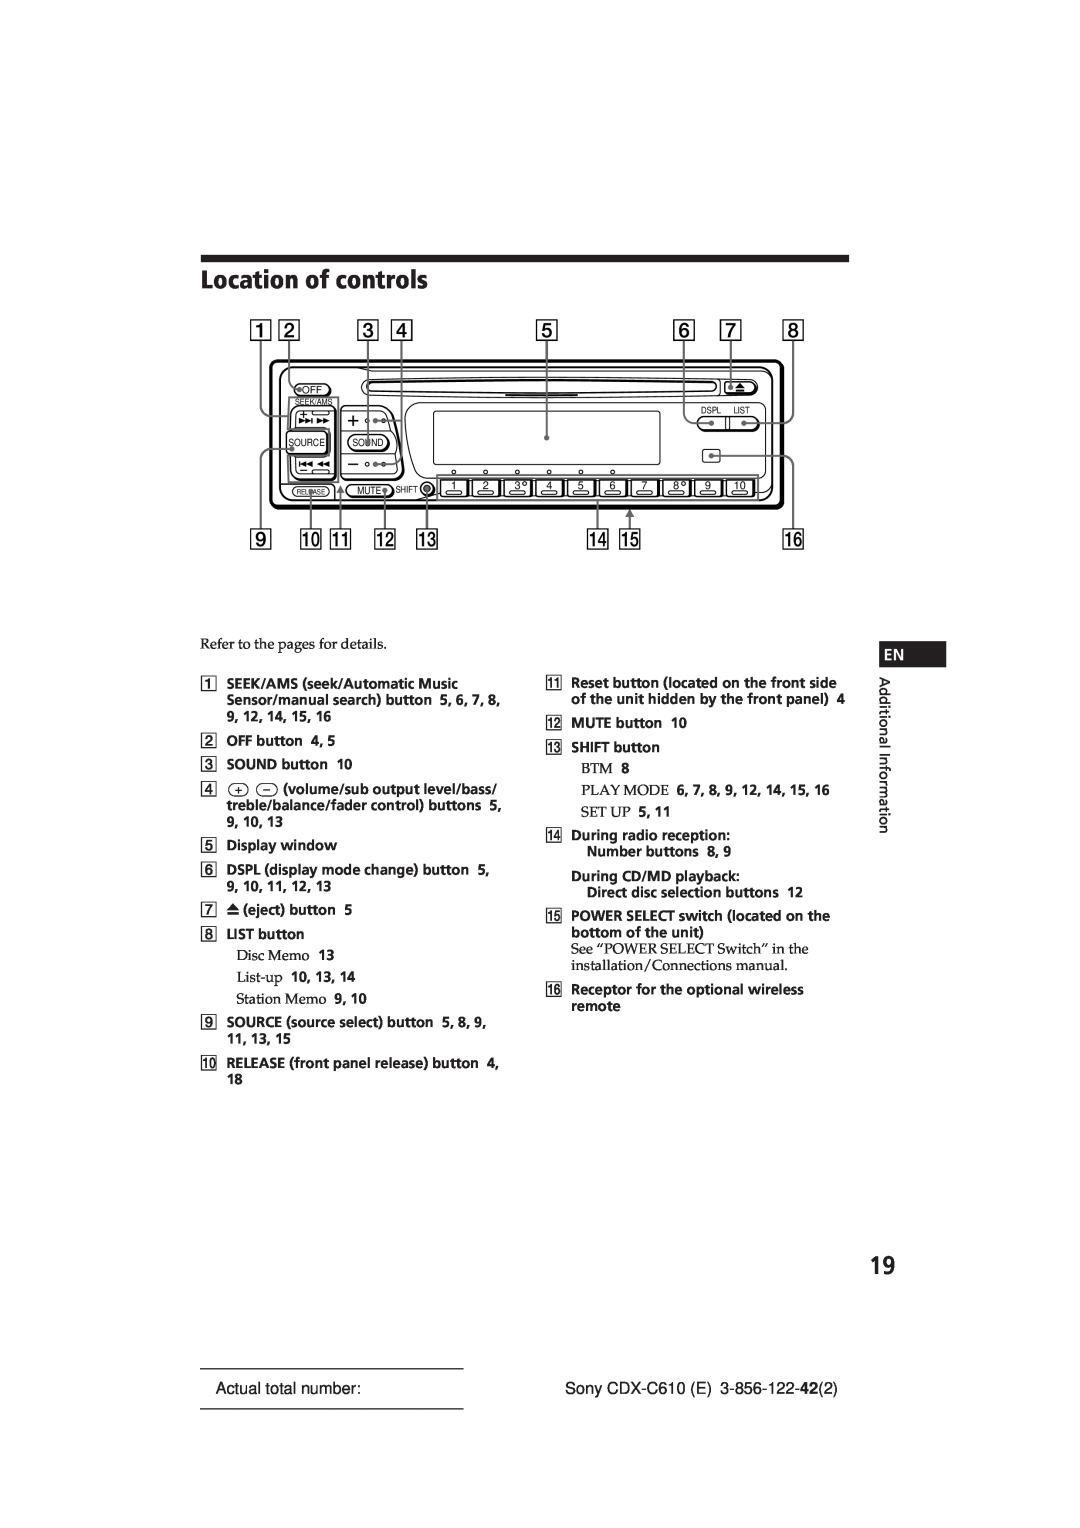 Sony manual Location of controls, Actual total number, Sony CDX-C610E 